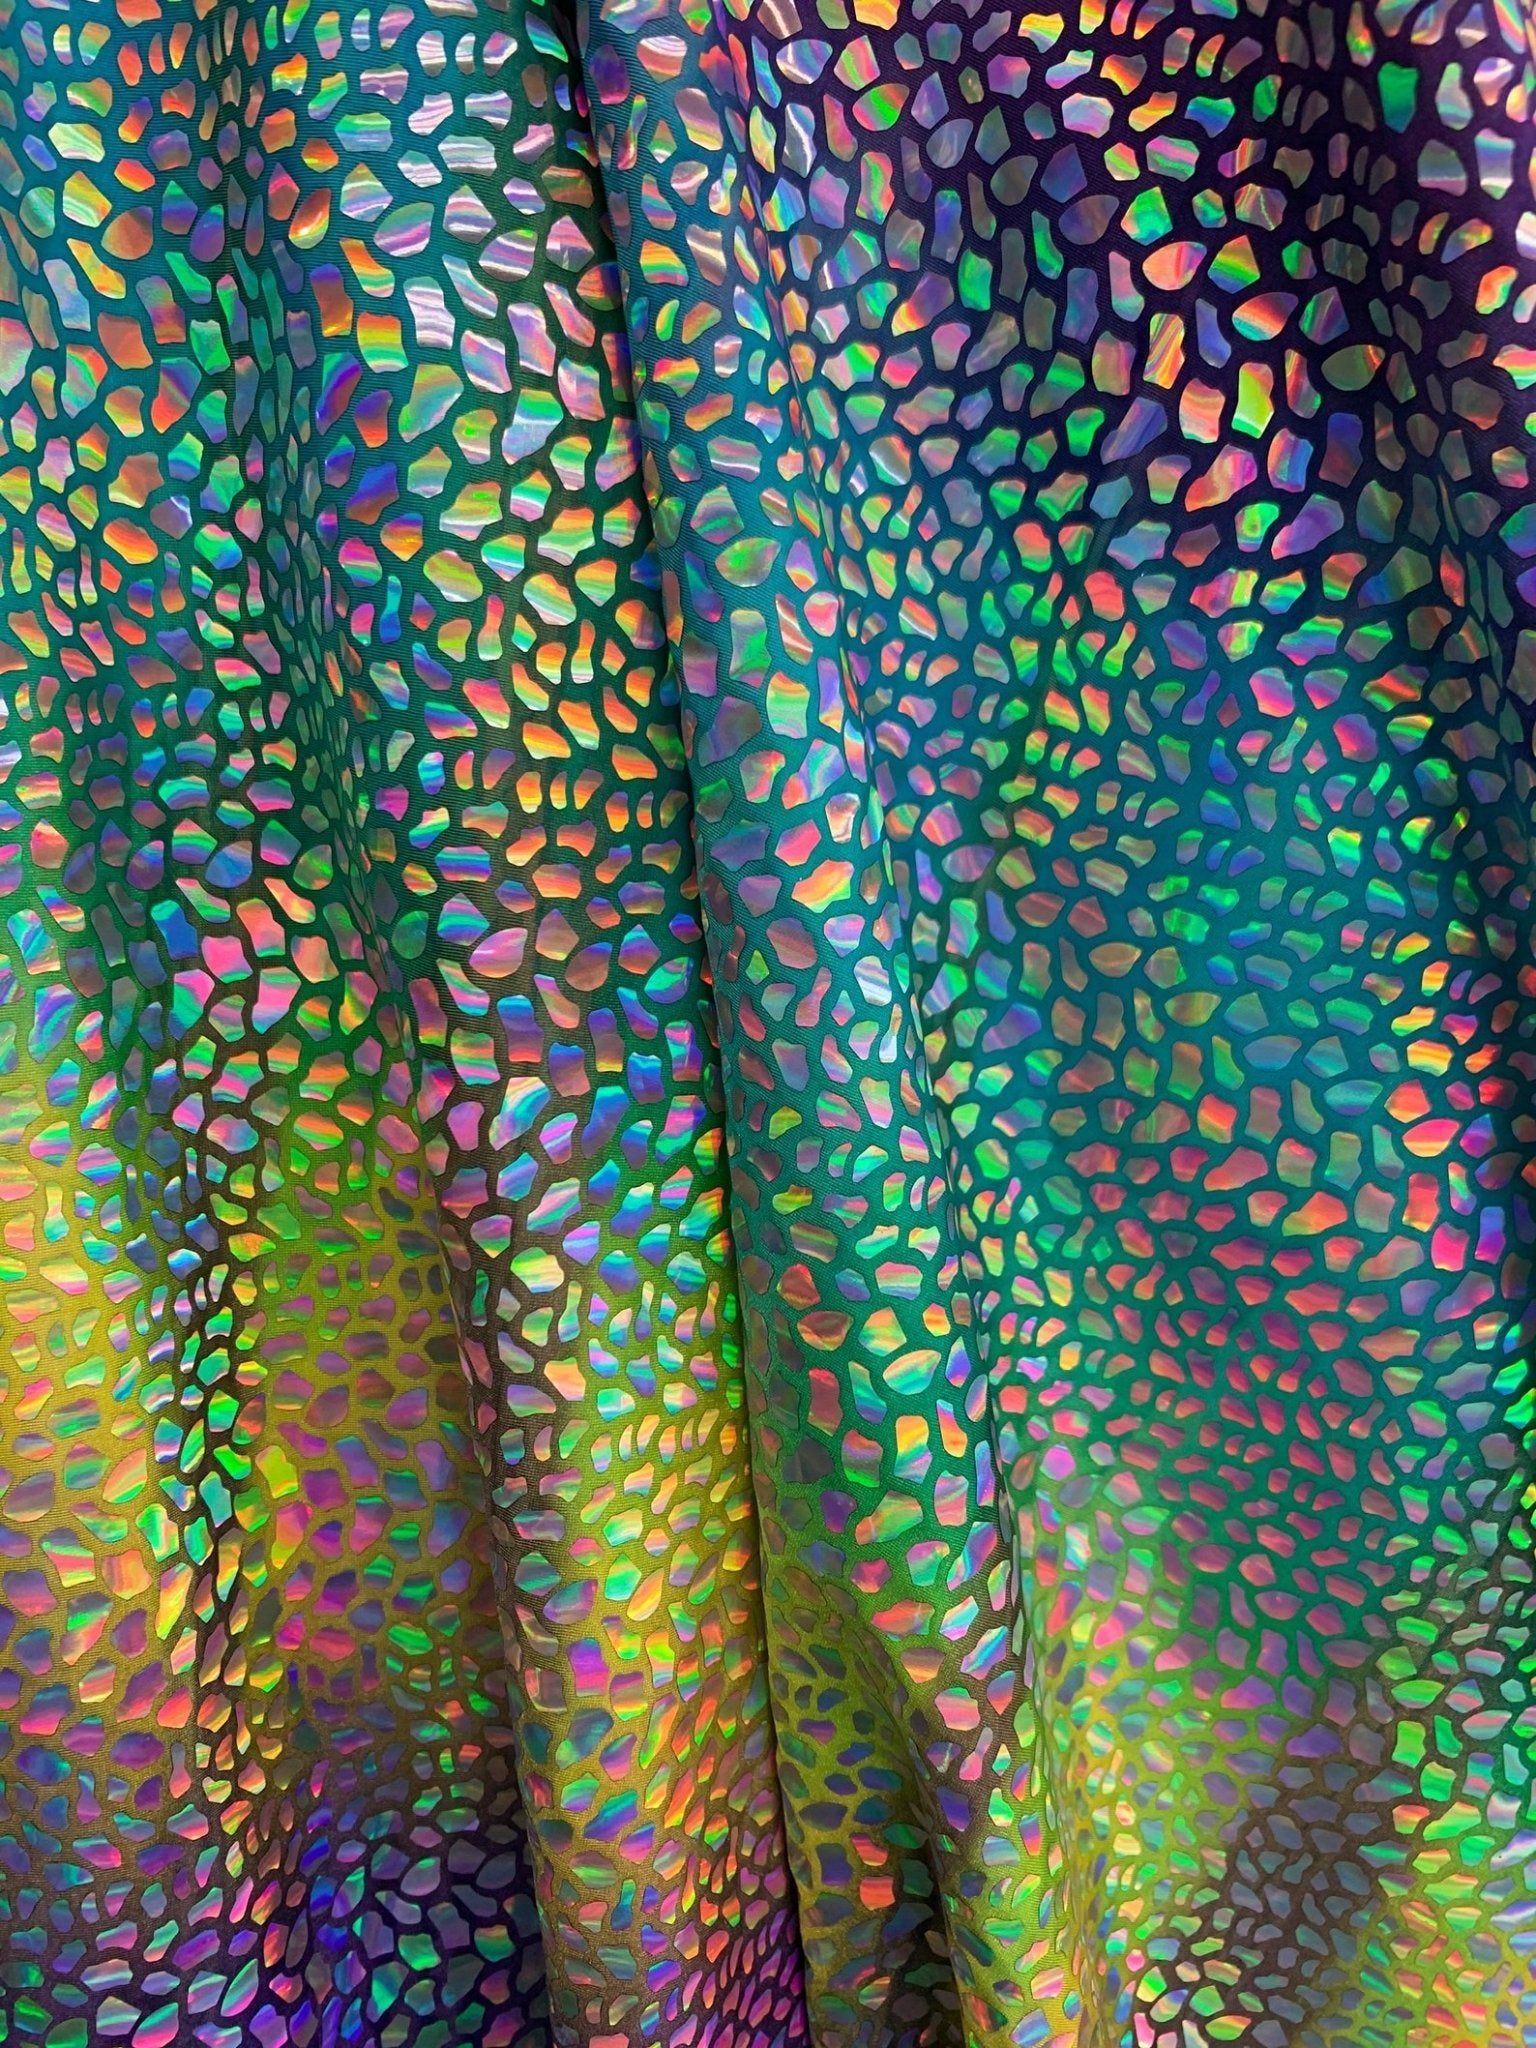 Yellow Iridescent Sequins Poly Spandex Tie Dye Fabric By The yardSpandex FabricICEFABRICICE FABRICSYellow Iridescent Sequins Poly Spandex Tie Dye Fabric By The yard ICEFABRIC